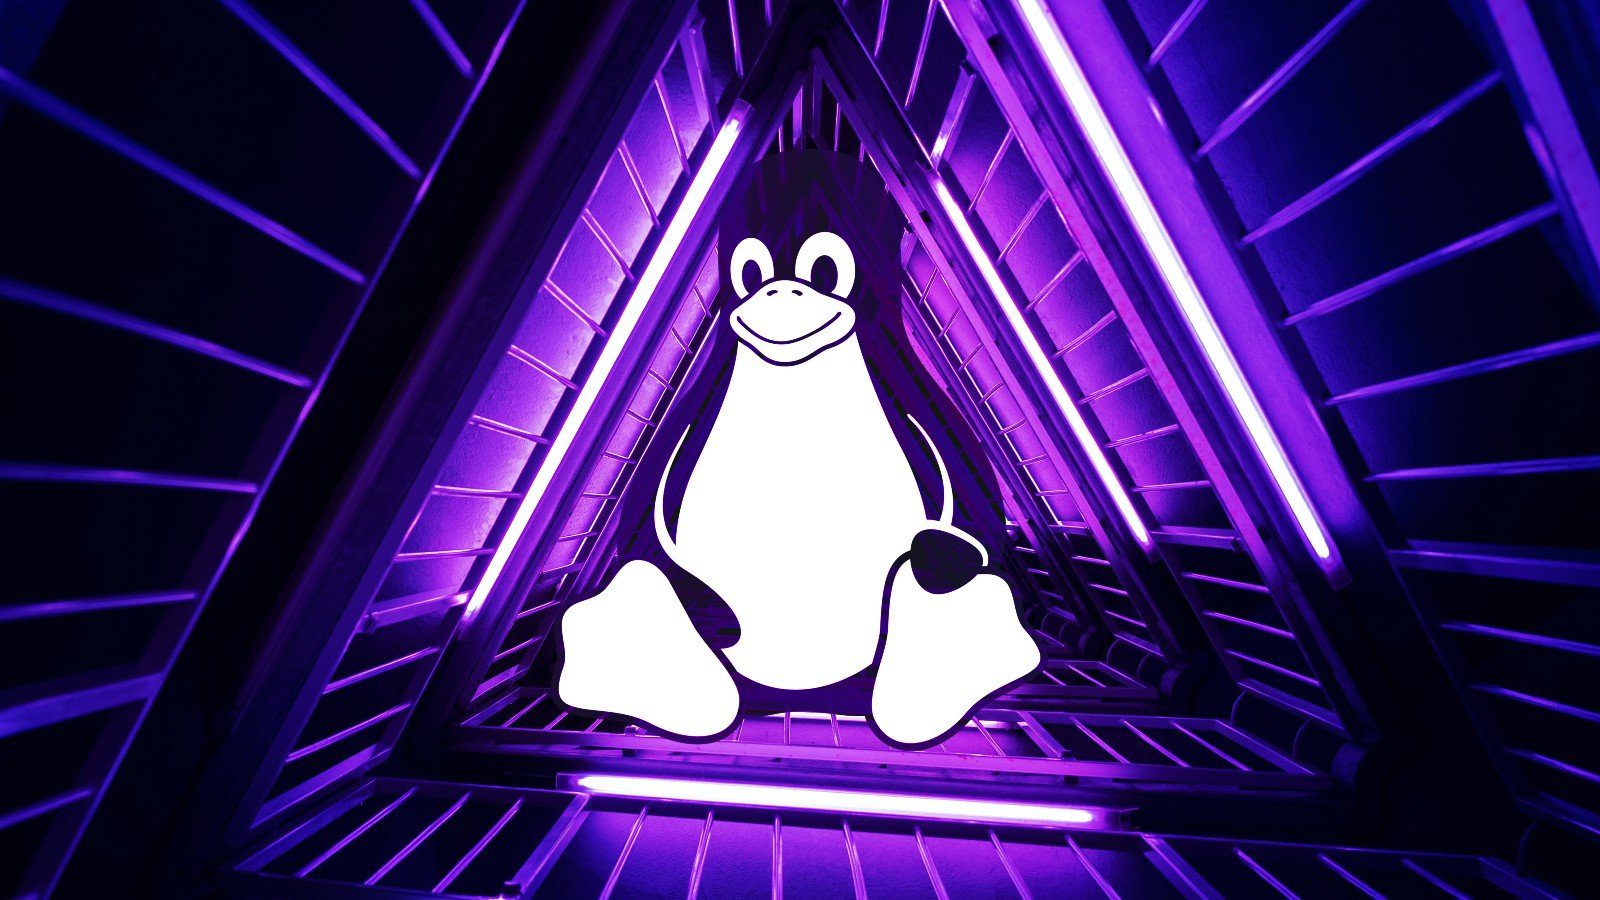 New Linux kernel NetFilter flaw gives attackers root privileges – Source: www.bleepingcomputer.com